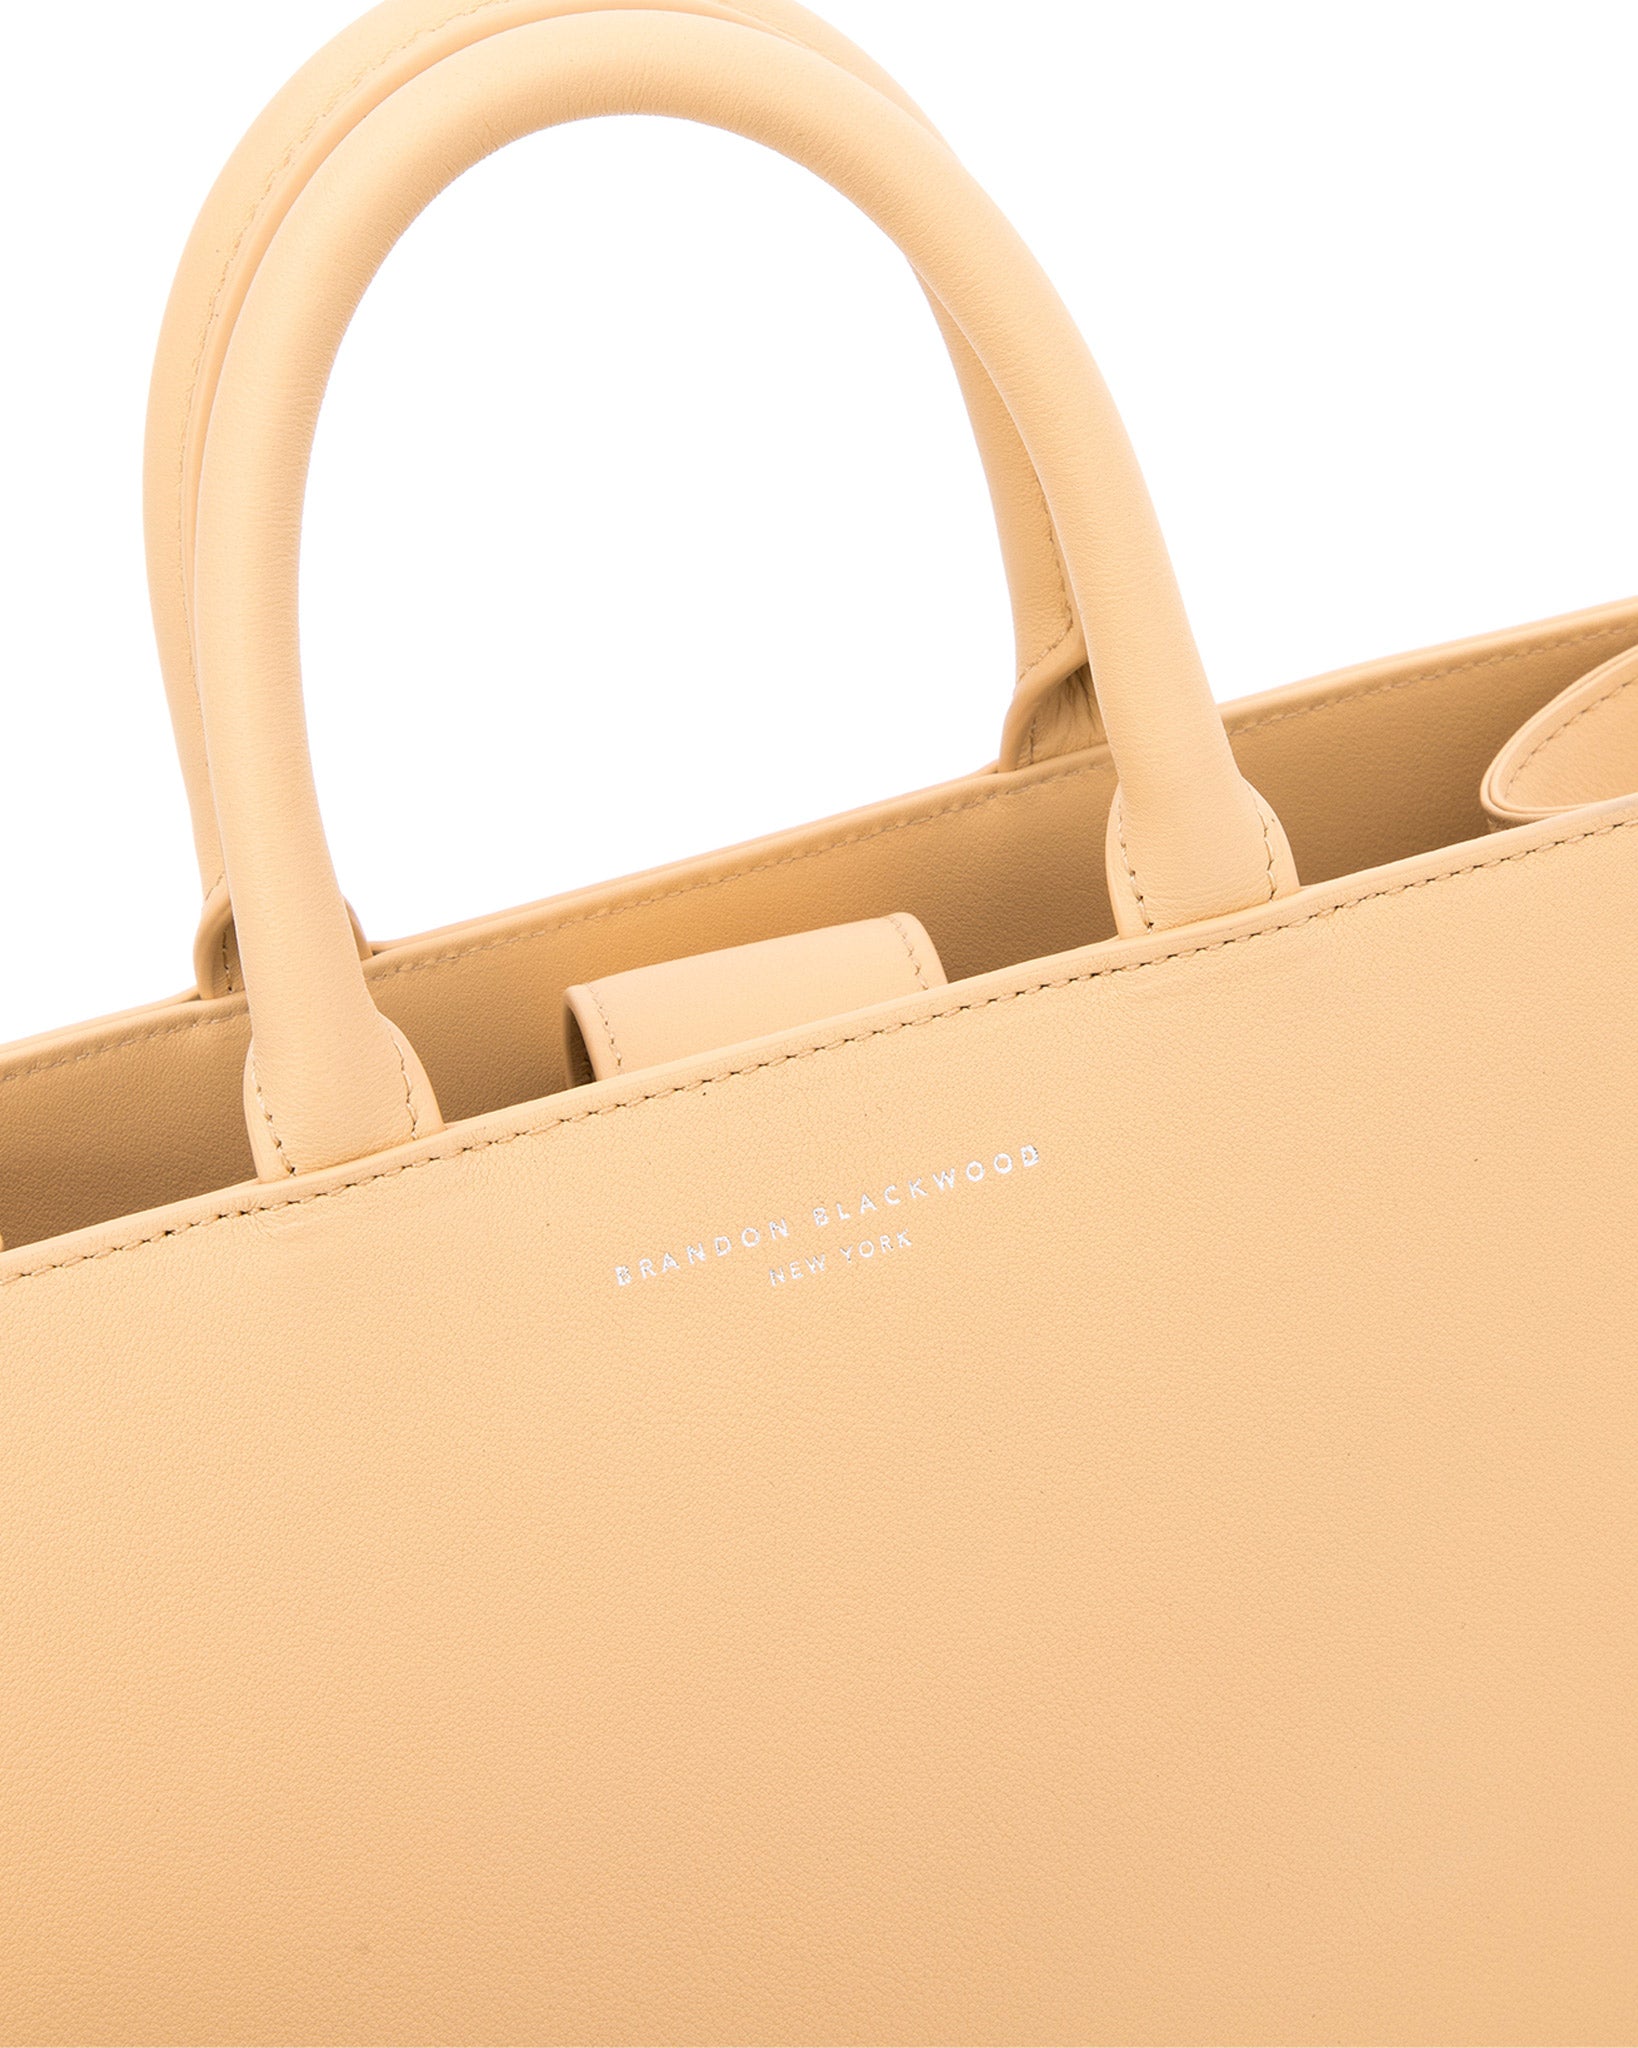 Brandon Blackwood New York - Marcy Ave Tote - Beige Leather